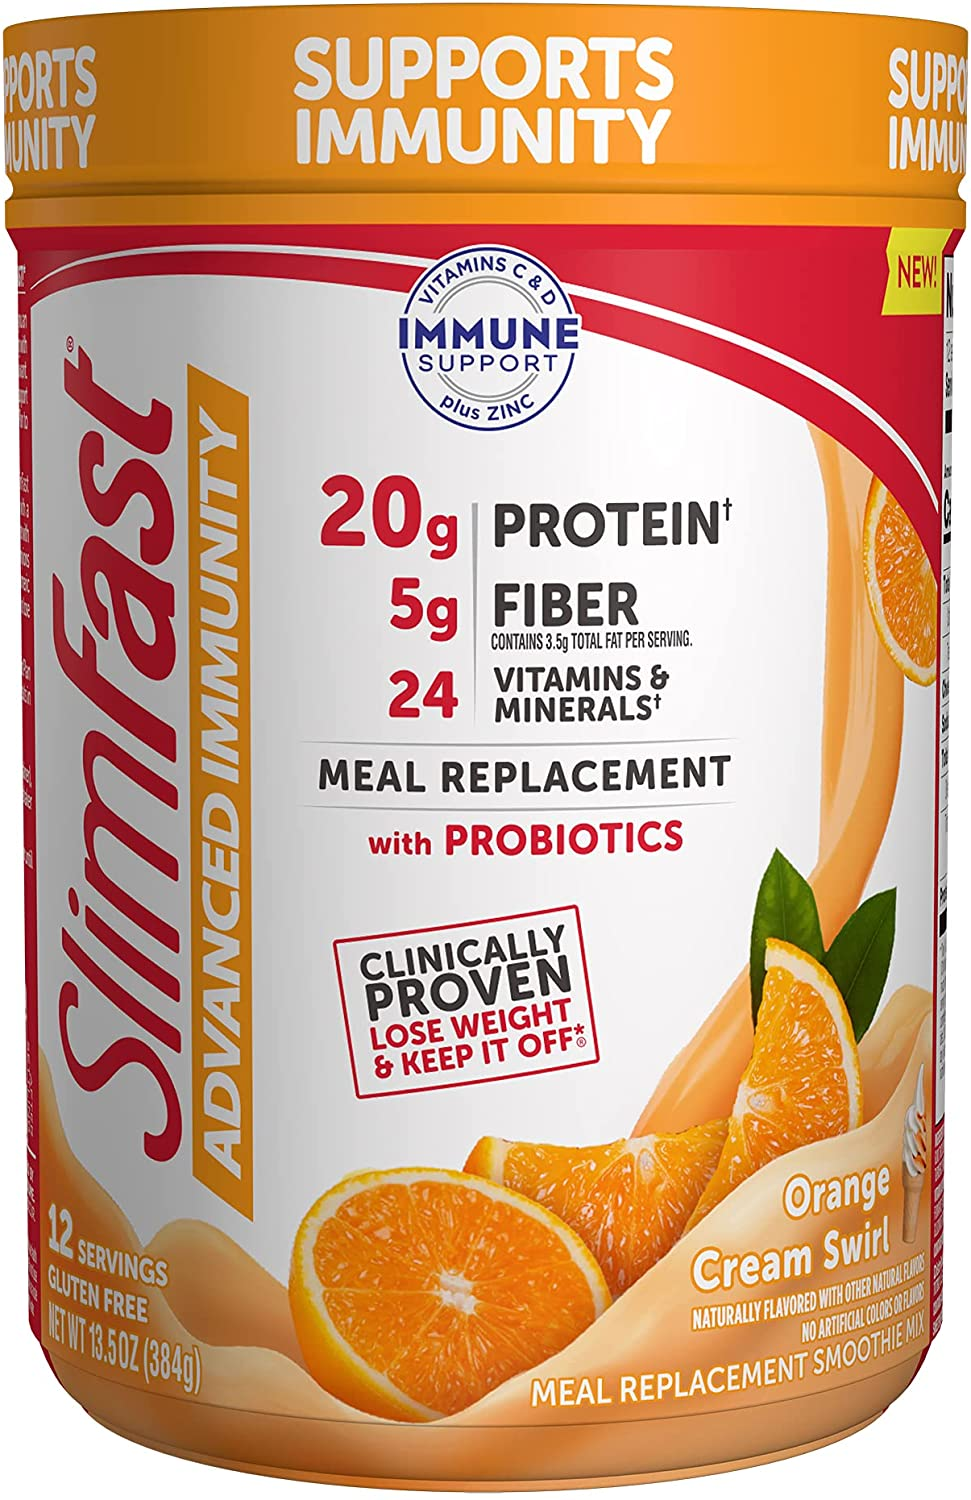 Slimfast Advanced Nutrition High Protein Meal Replacement Smoothie Mix, Vanilla Cream, Weight Loss Powder, 20G of Protein, 12 Servings